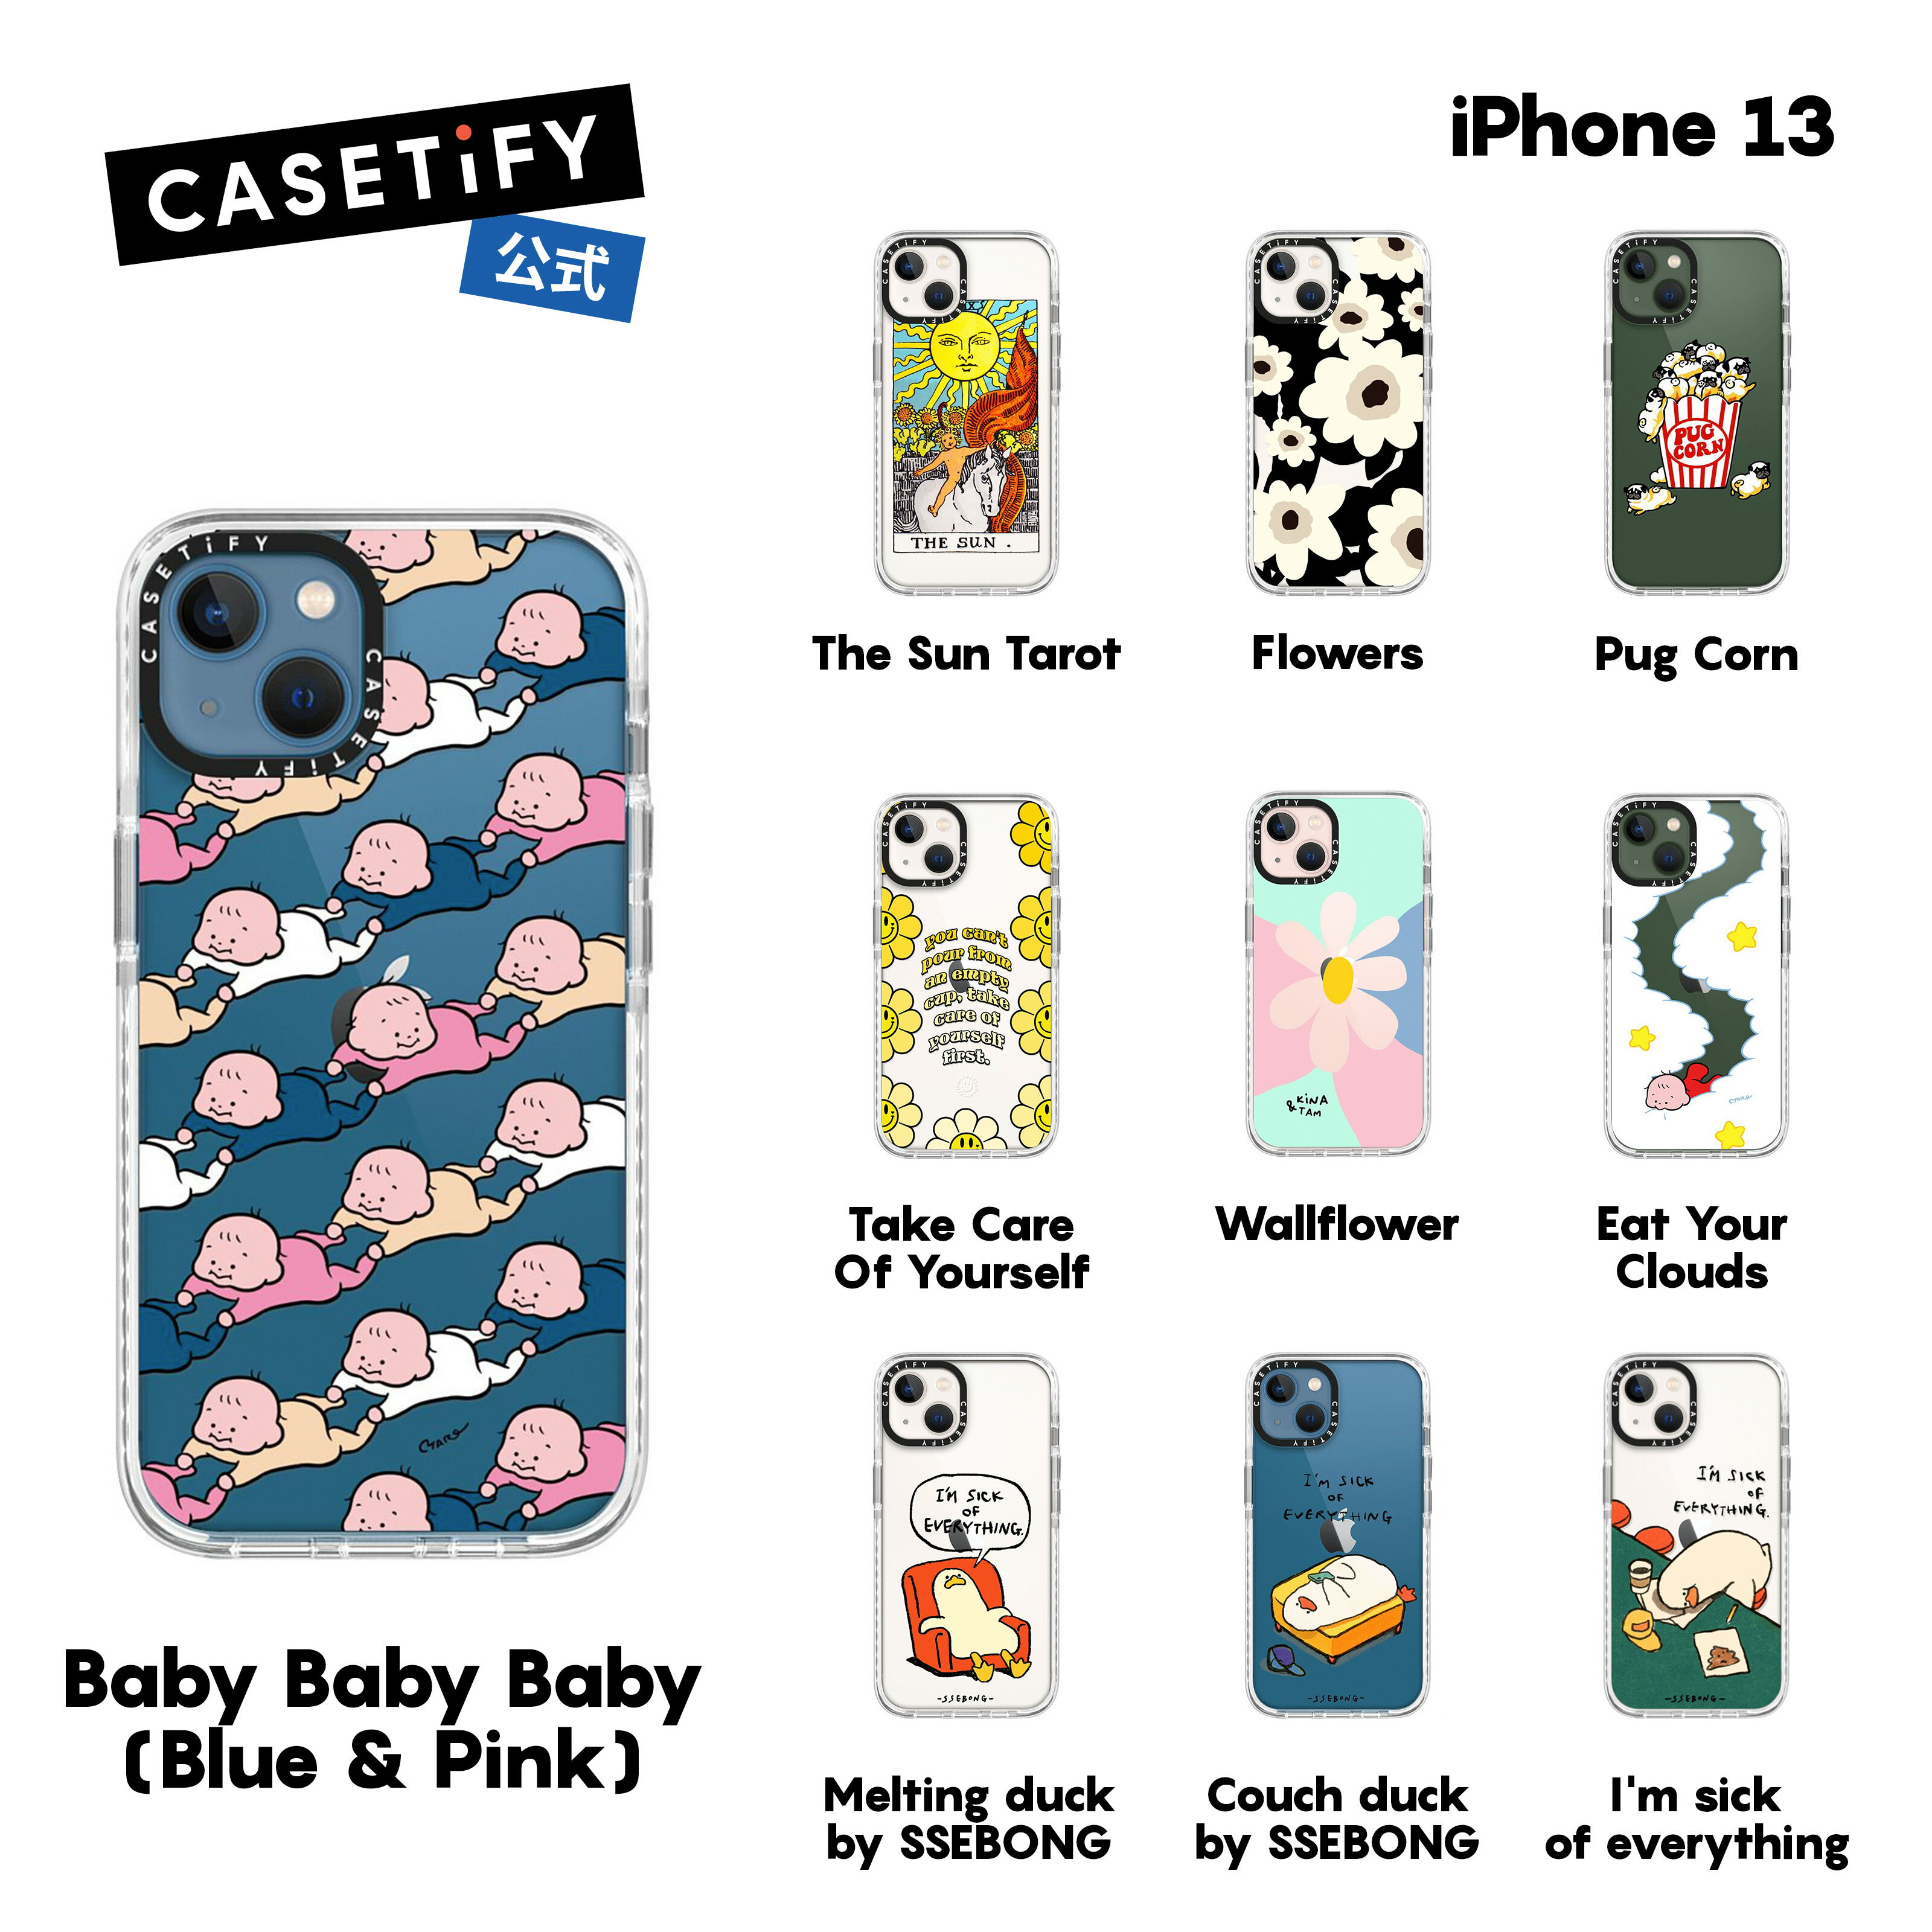 CASETiFY iPhone13 インパクトケース クリア ブラック クリア フロスト Hipster Frenchie Fawn Pug Corn Flowers DAISIES iPhoneケース iPhone13 耐衝撃 保護ケース 透明